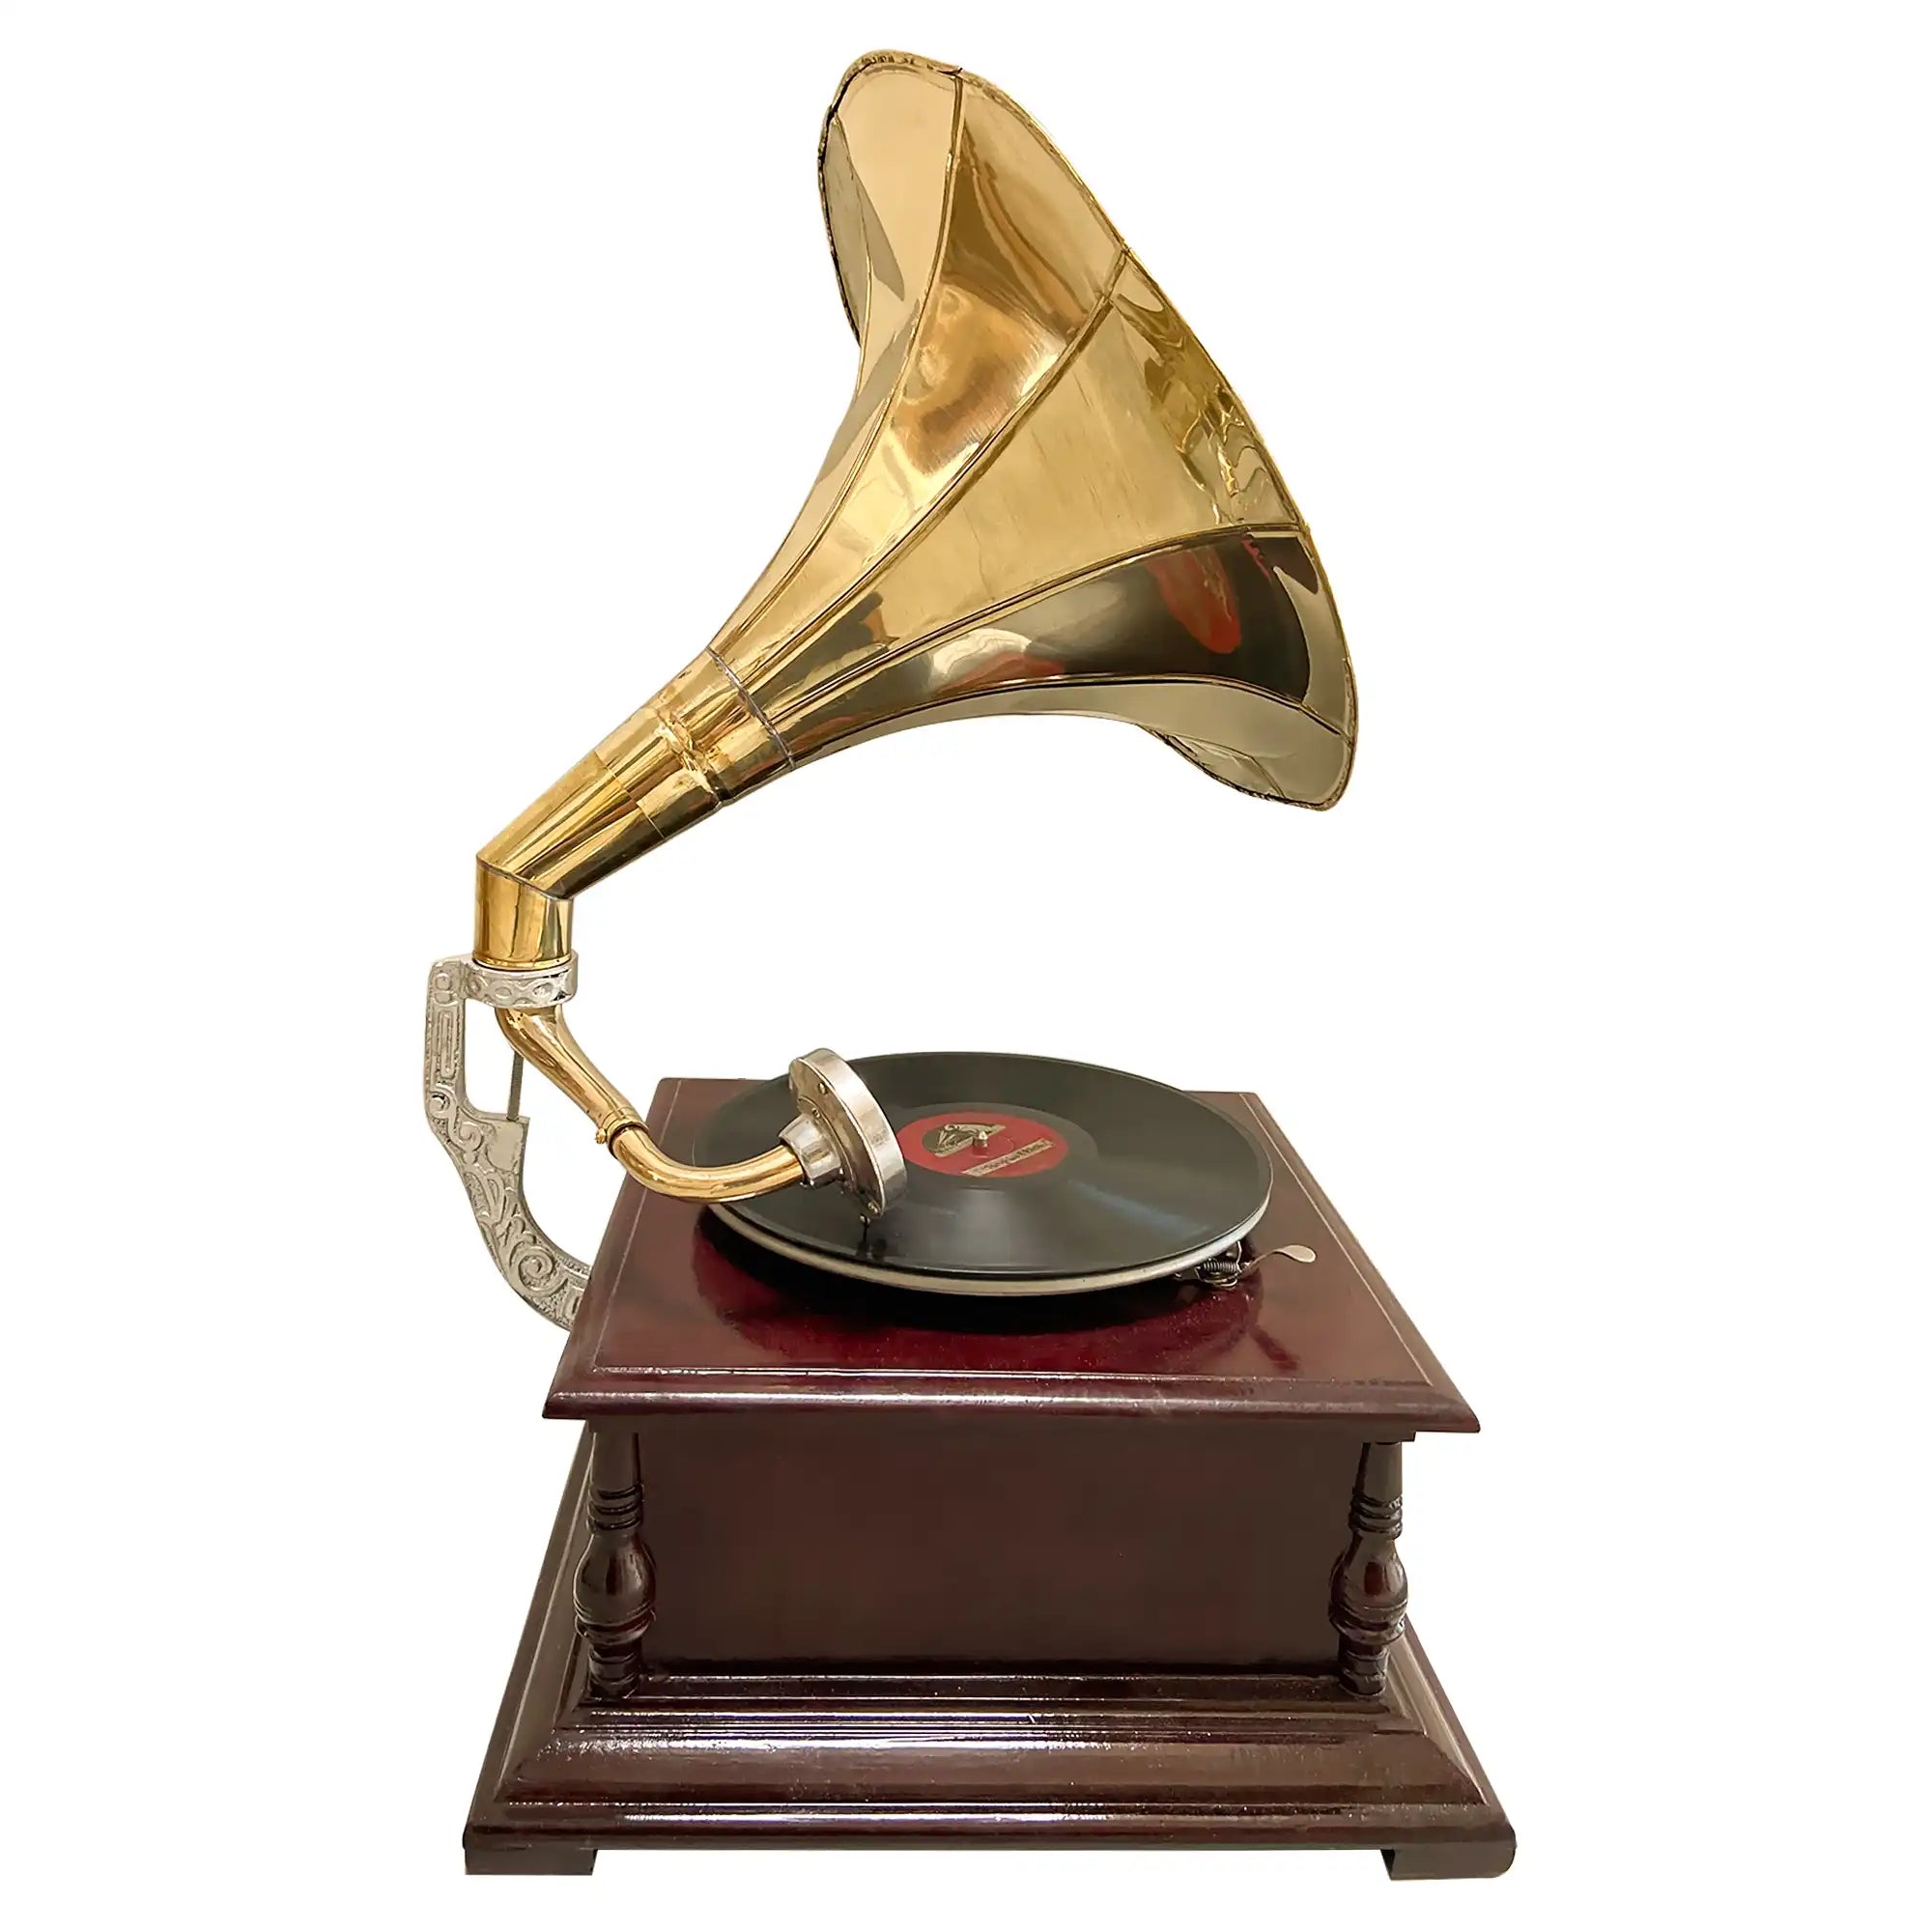 Antique Gramophone, Fully Functional Working Phonograpf, win-up record player, handcrafted, Vintage, Beautiful Gramophone